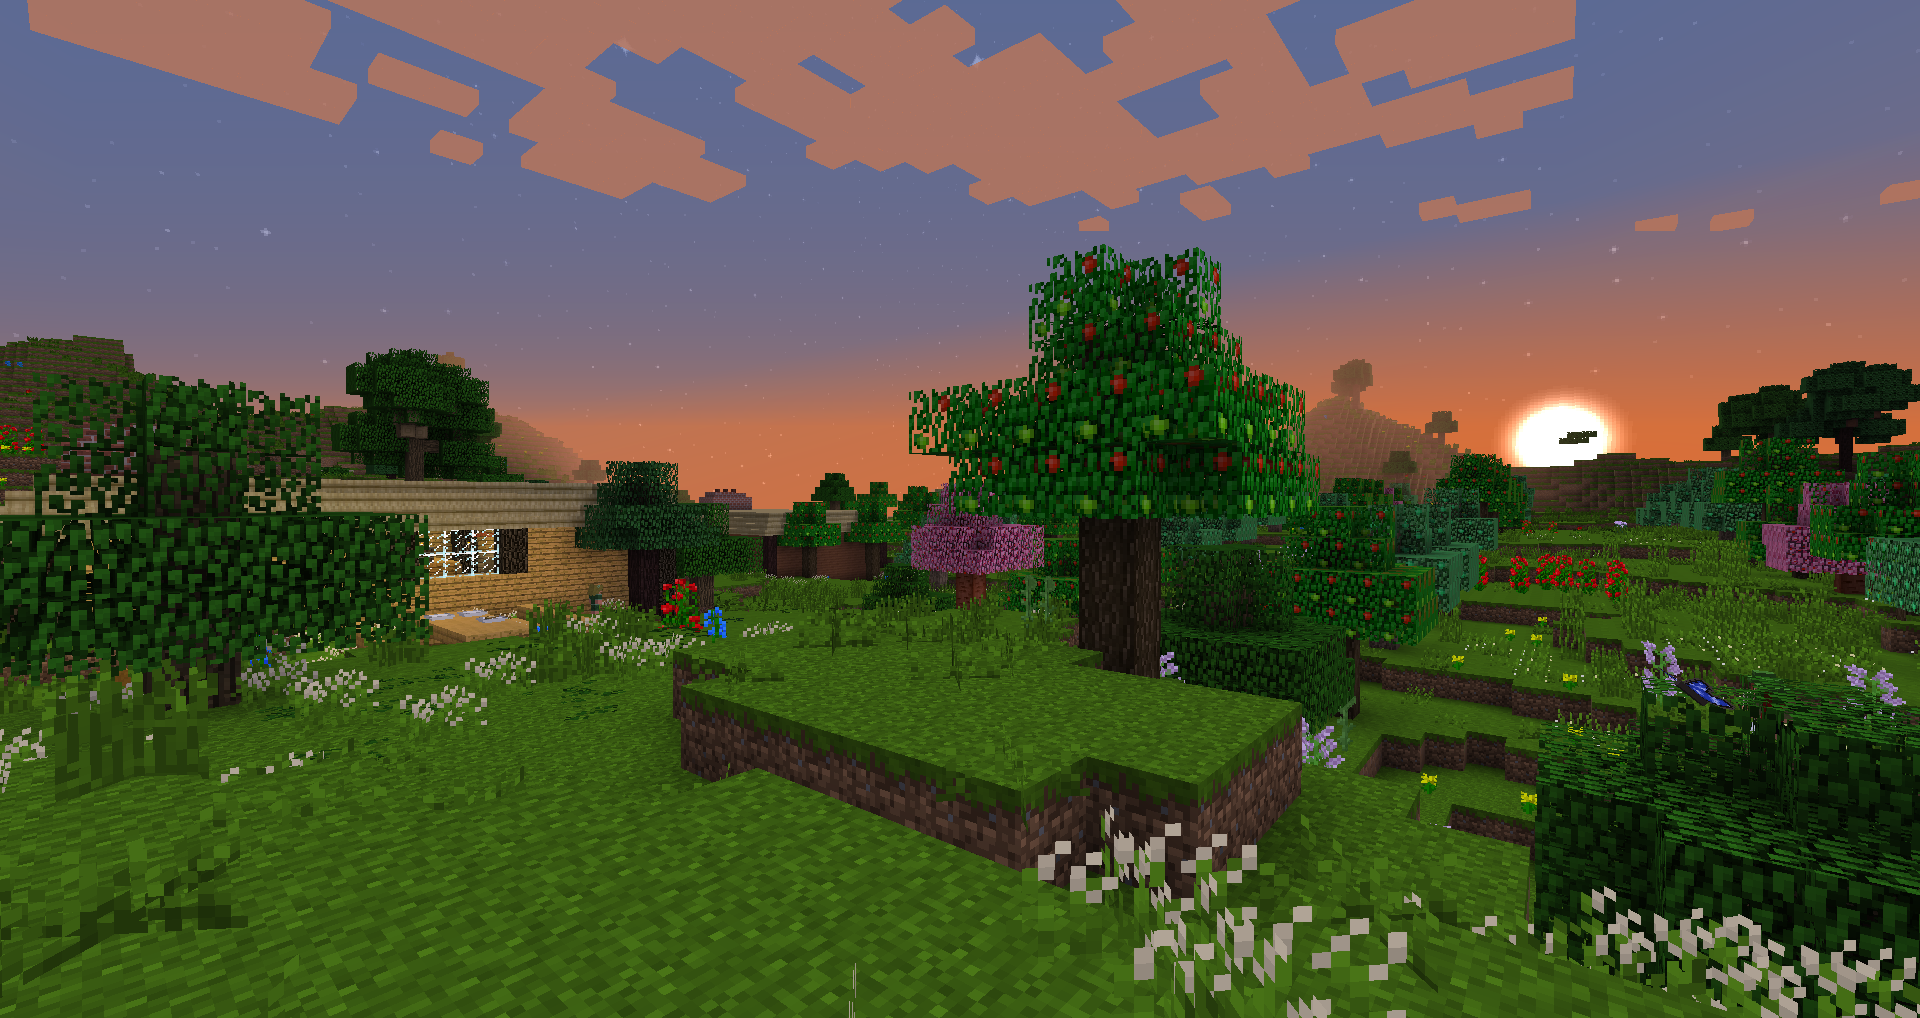 The Shire  The Lord of the Rings Minecraft Mod Wiki 